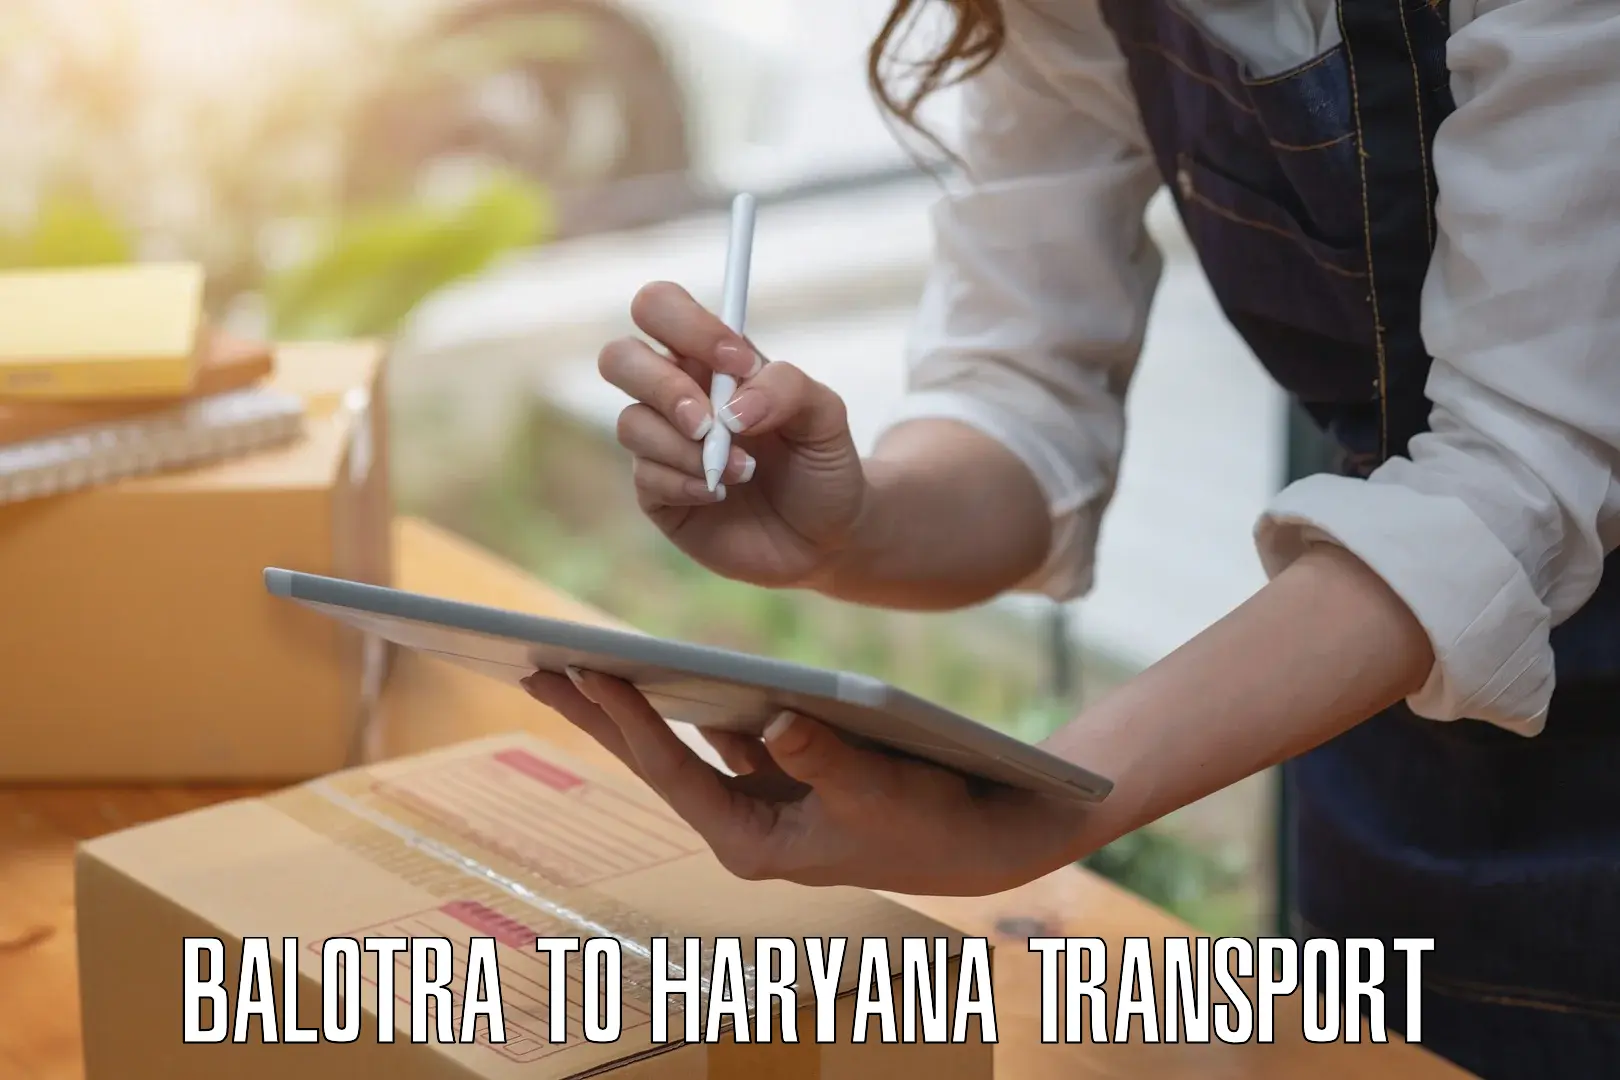 Road transport online services Balotra to Jhajjar